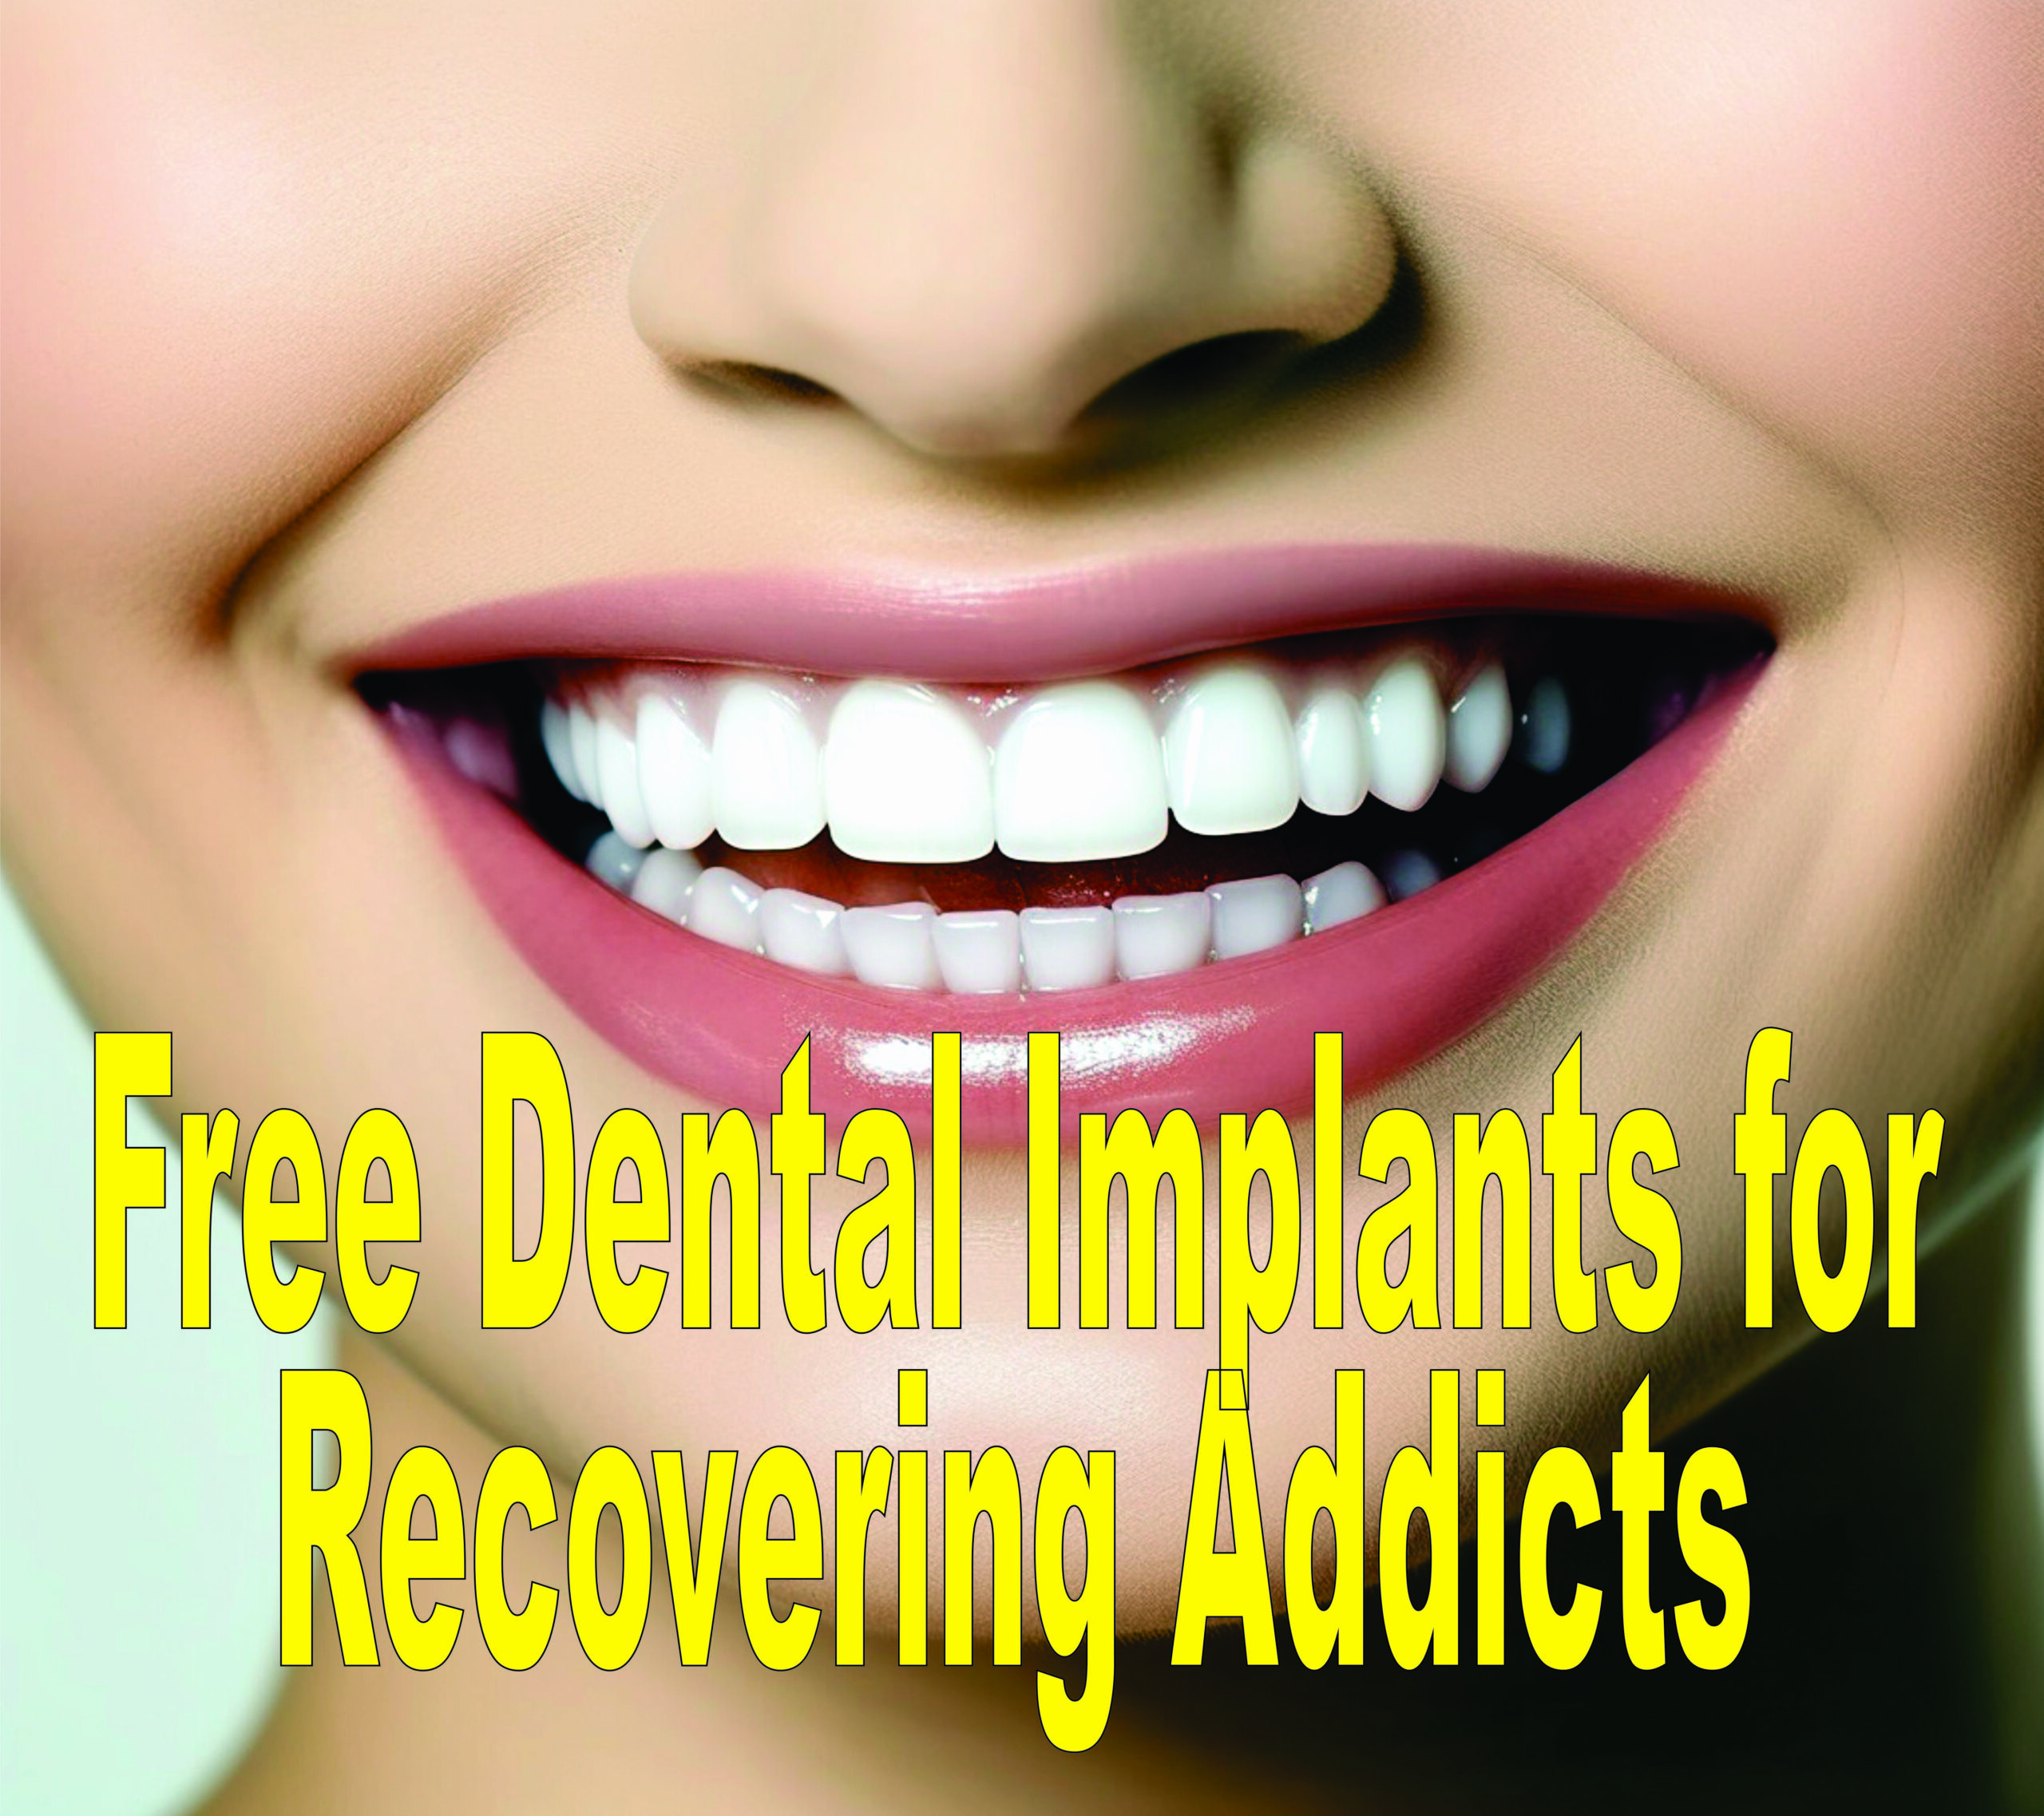 Free Dental Implants For Recovering Addicts